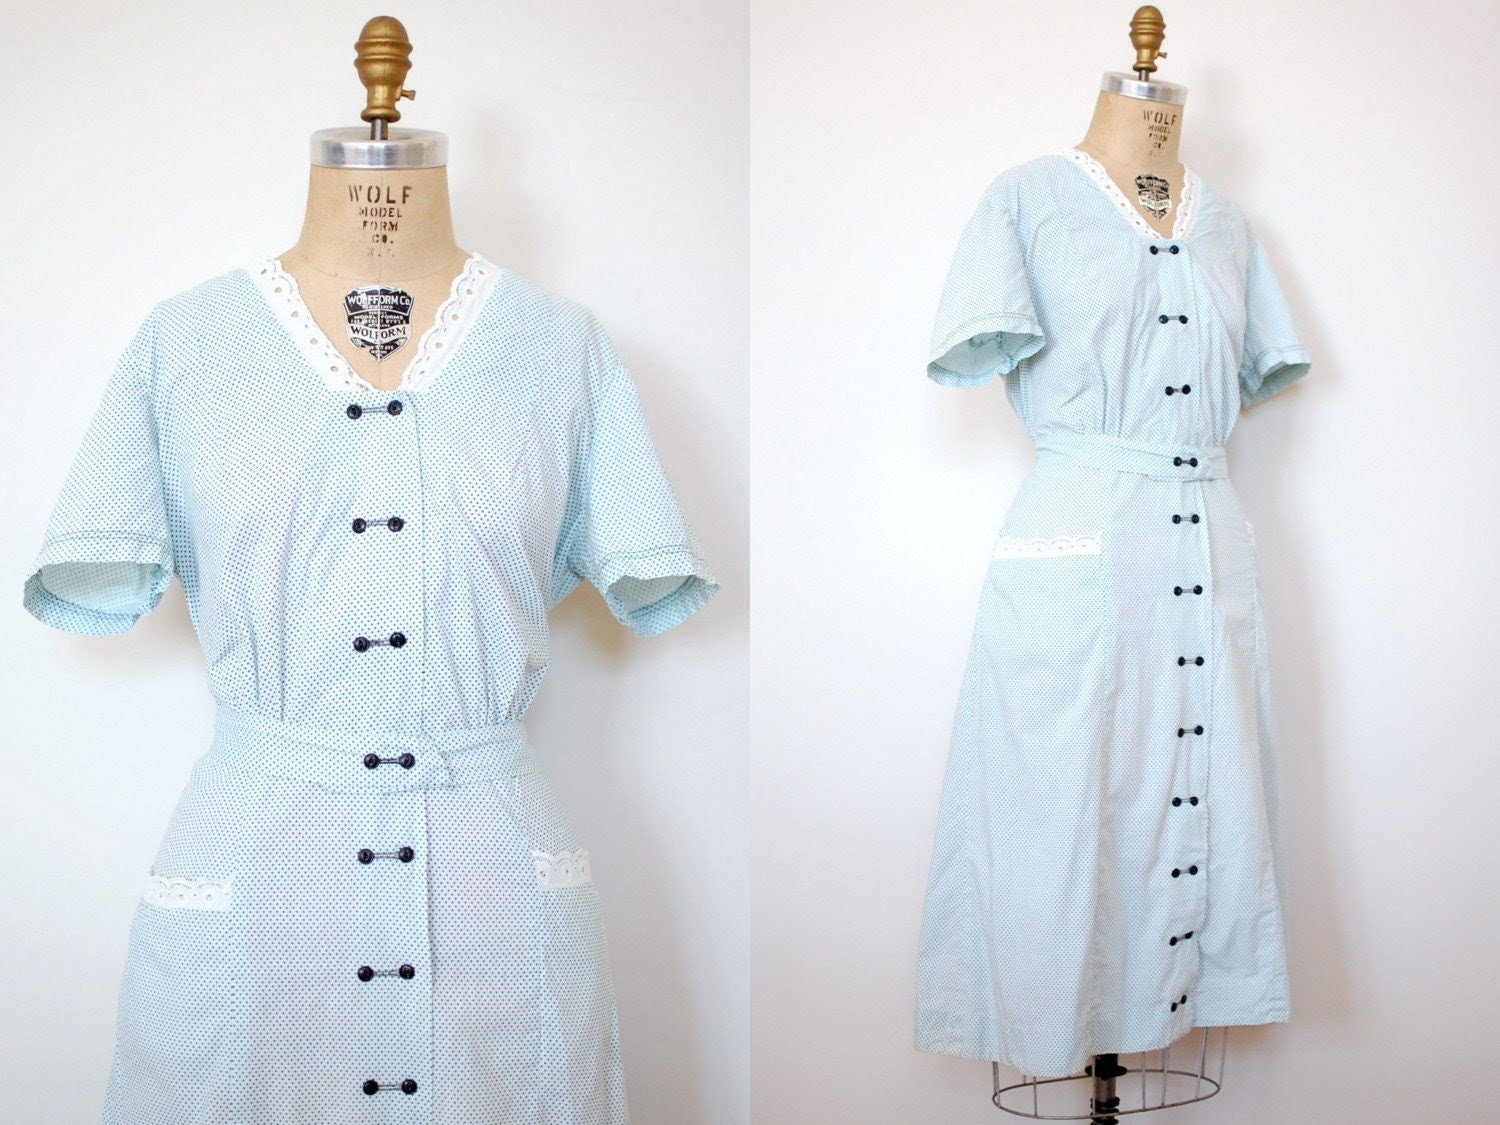 Outfits Anonymous: shirtdresses - then and now